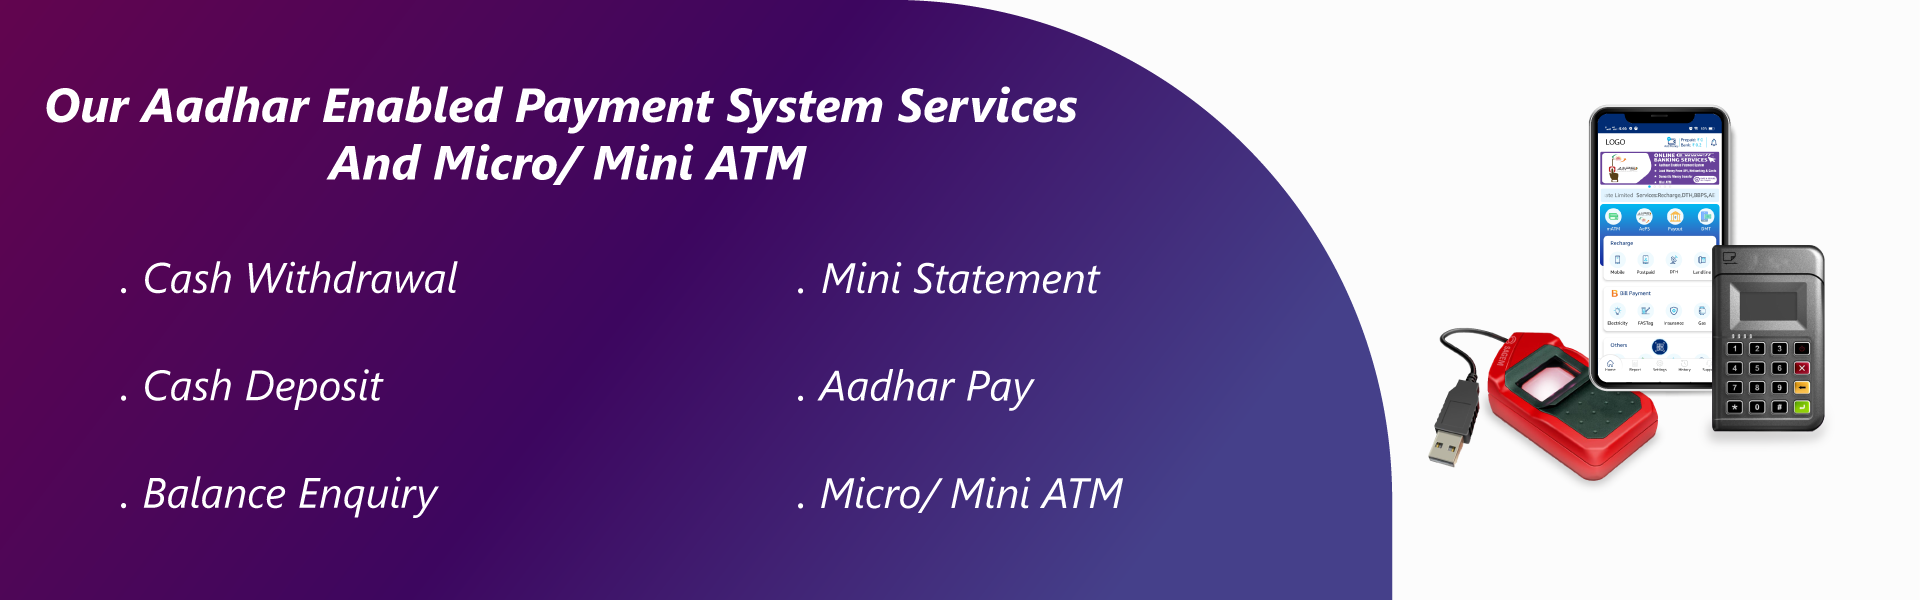 File:The Chairperson, National Advisory Council, Smt. Sonia Gandhi launched  the Aadhar enabled micro-ATM based